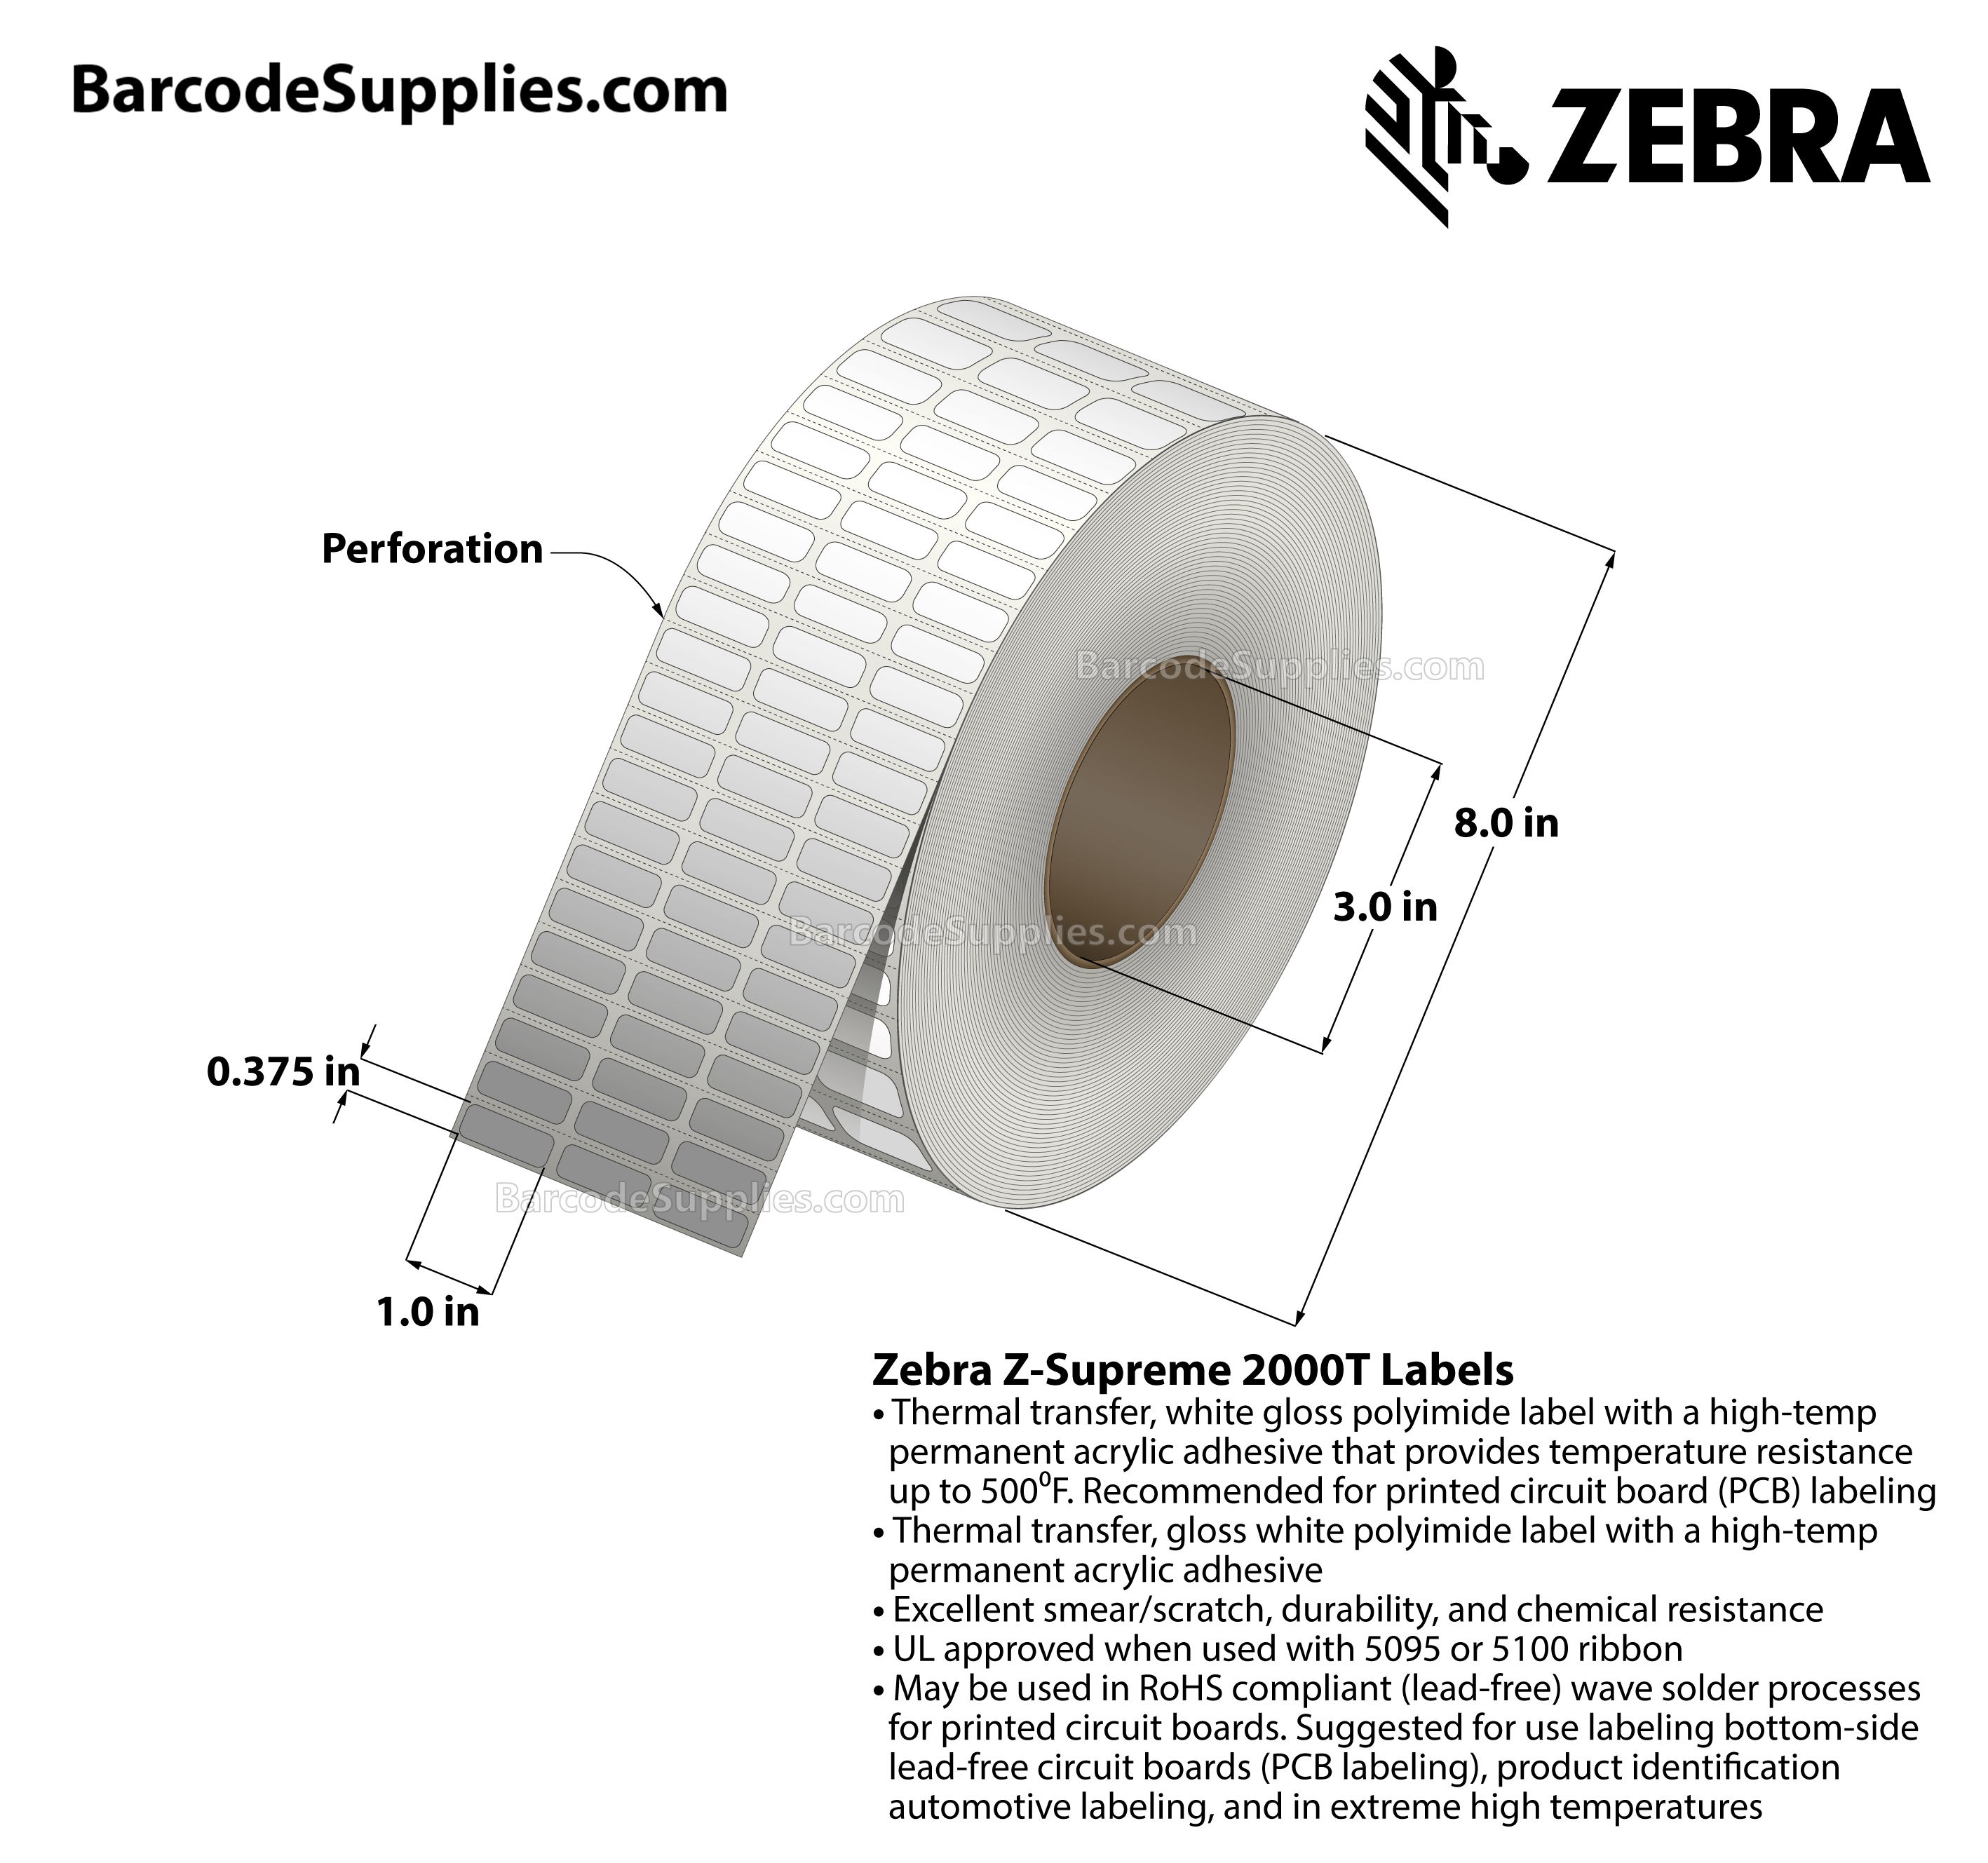 1 x 0.375 Thermal Transfer White Z-Supreme 2000T (3-Across) Labels With High-temp Adhesive - Perforated - 10002 Labels Per Roll - Carton Of 1 Rolls - 10002 Labels Total - MPN: 10023199